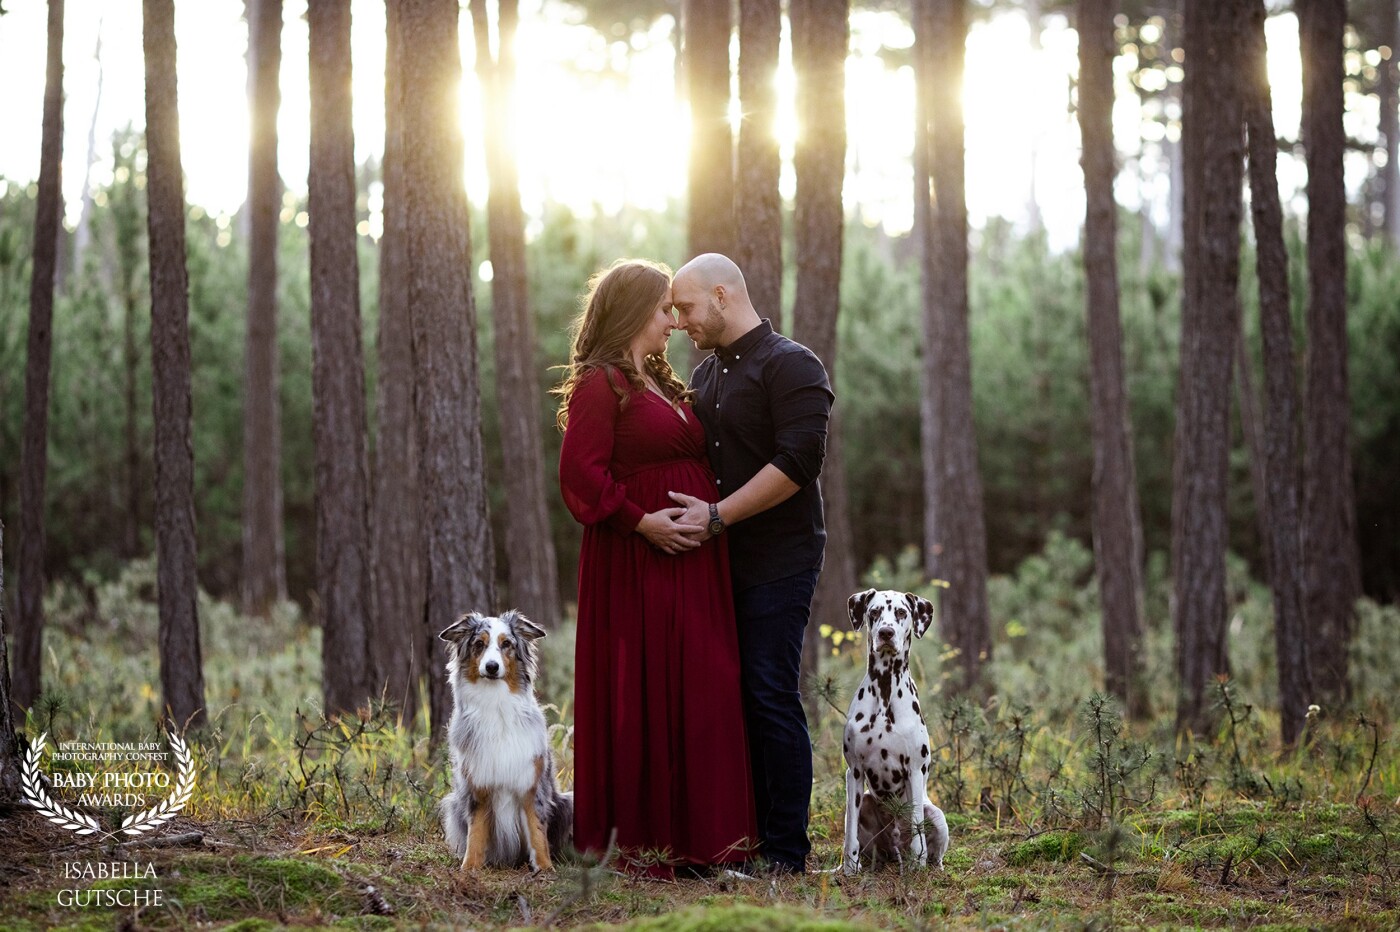 I love it when my clients bring their dogs. This photoshoot was amazing. The location, the light, the beautiful mum to be, everything was just perfect!